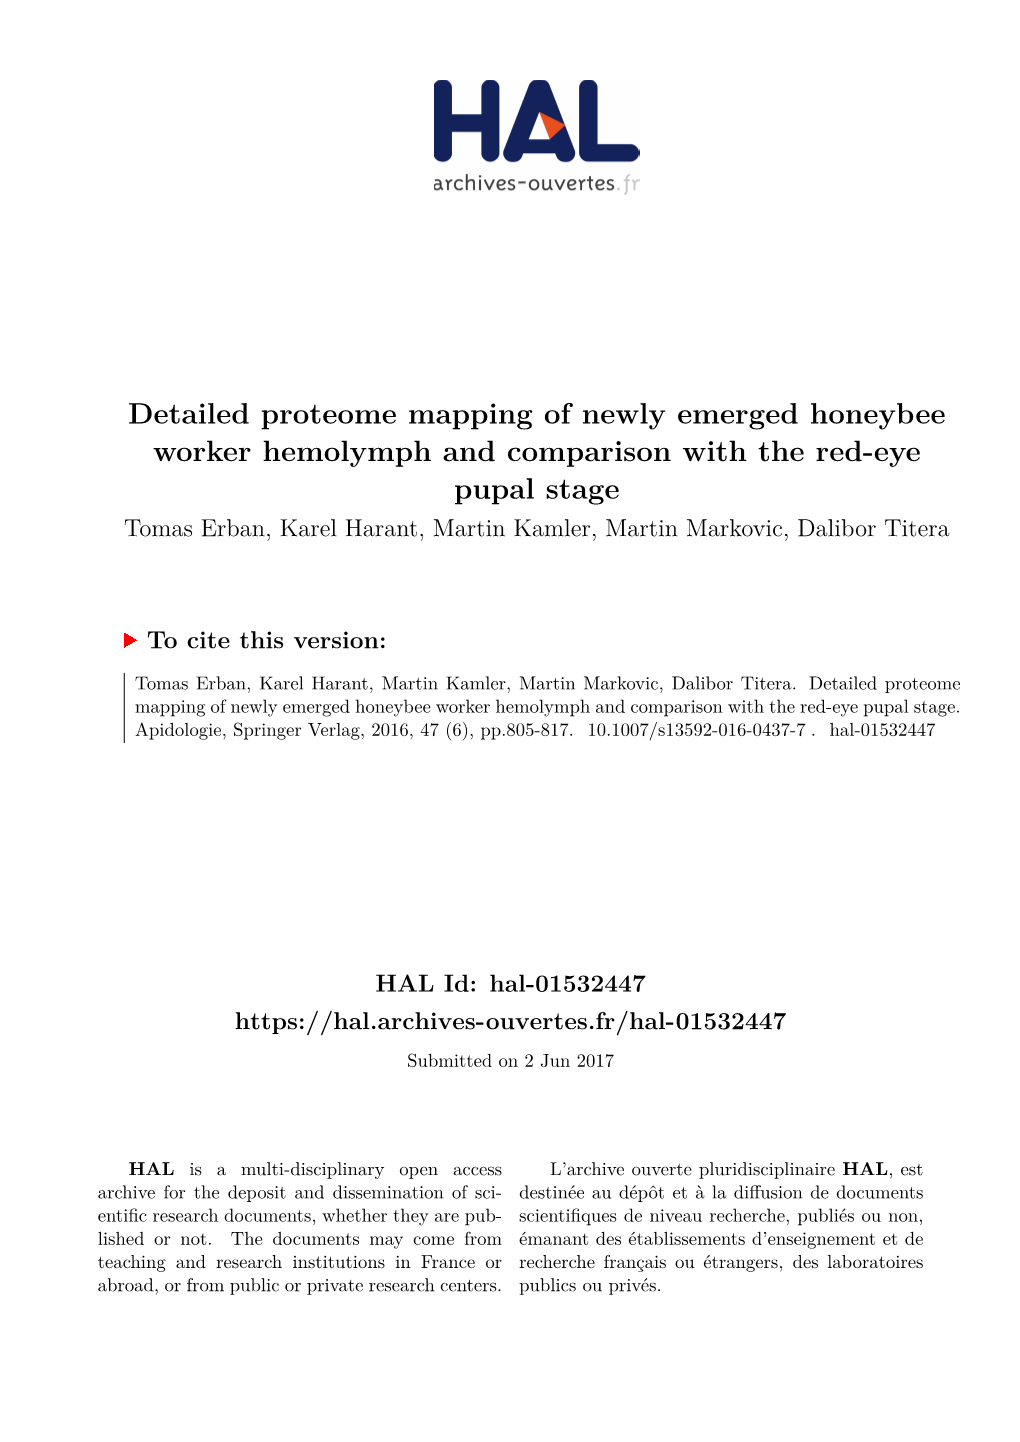 Detailed Proteome Mapping of Newly Emerged Honeybee Worker Hemolymph and Comparison with the Red-Eye Pupal Stage